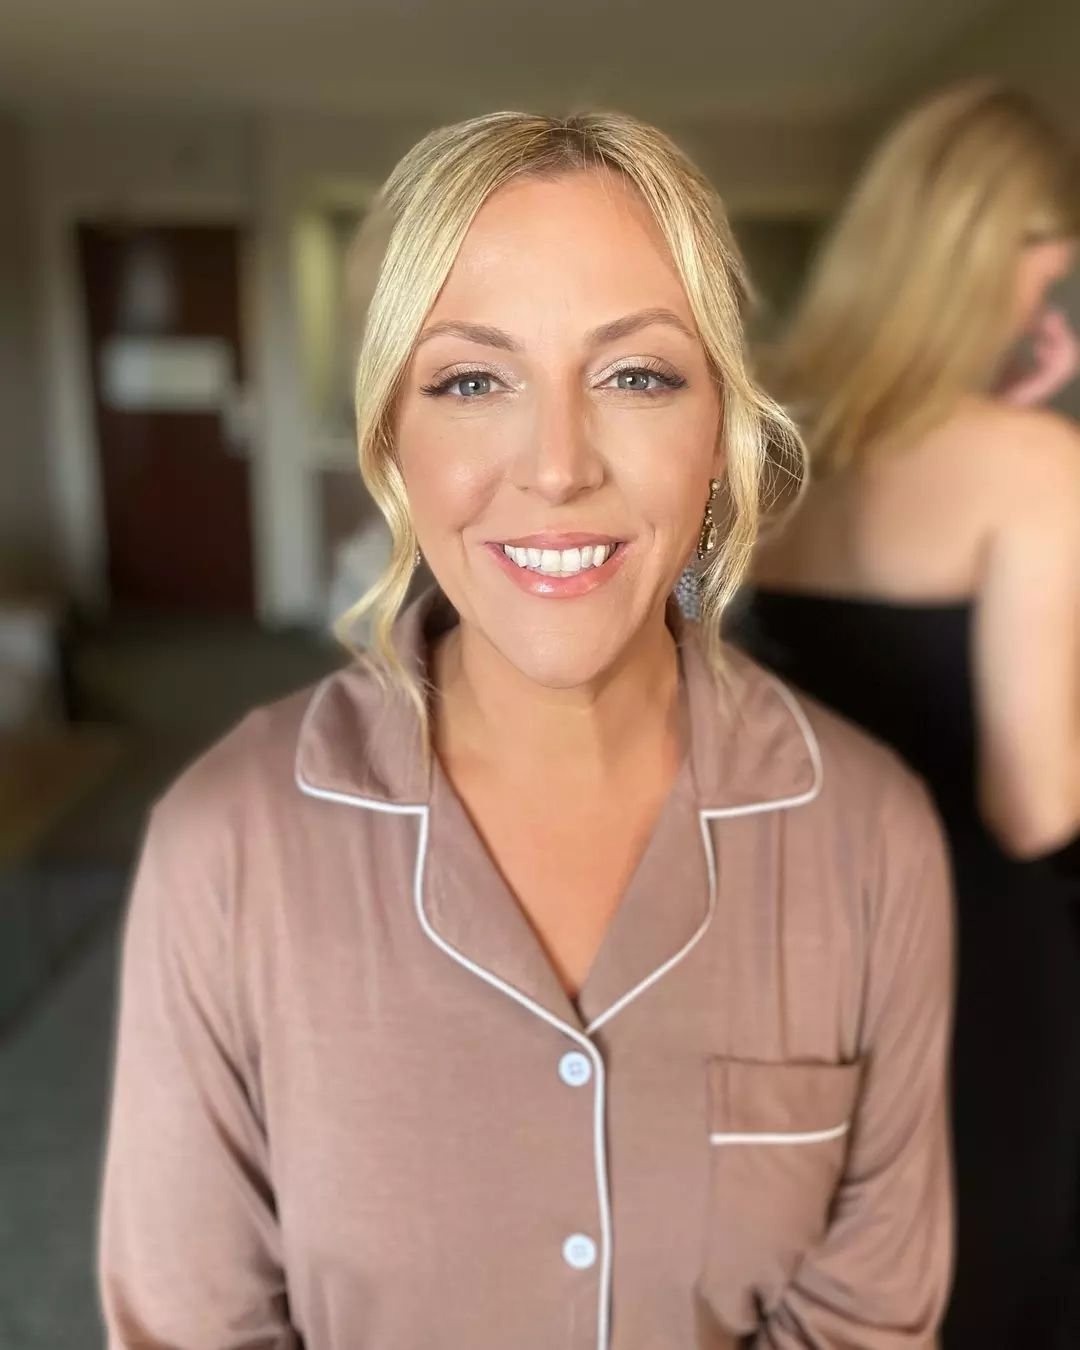 Loving the glowing glam! A soft shimmer eye adds the perfect touch&nbsp;🙌✨
.
.
.
#glam #filterfree #flawless #makeup #bridesmaidmakeup #travelbeautyteam #detroitweddings #welovemakeup